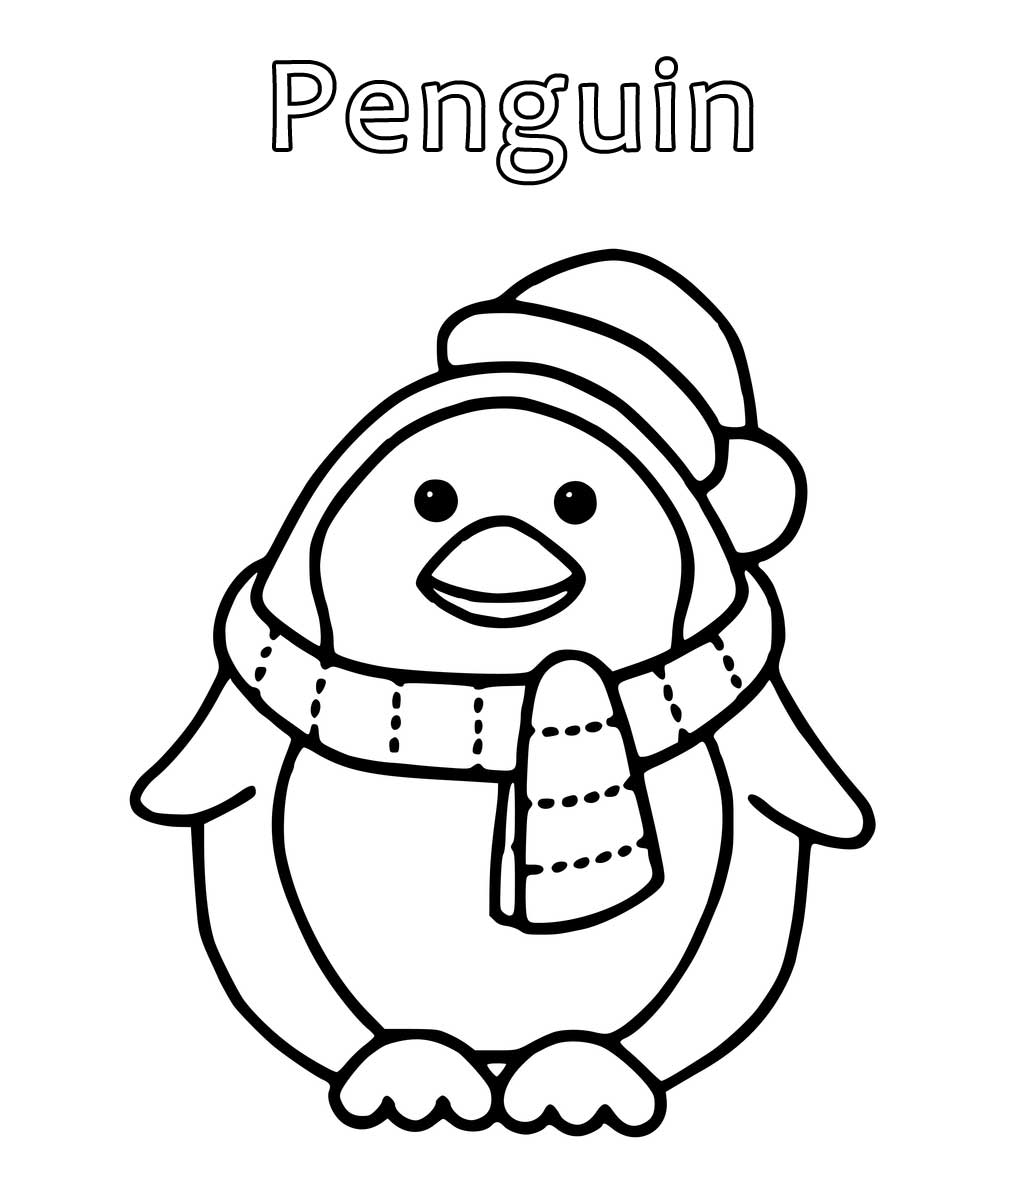 Realistic Penguin Coloring Pages at GetColorings.com | Free printable